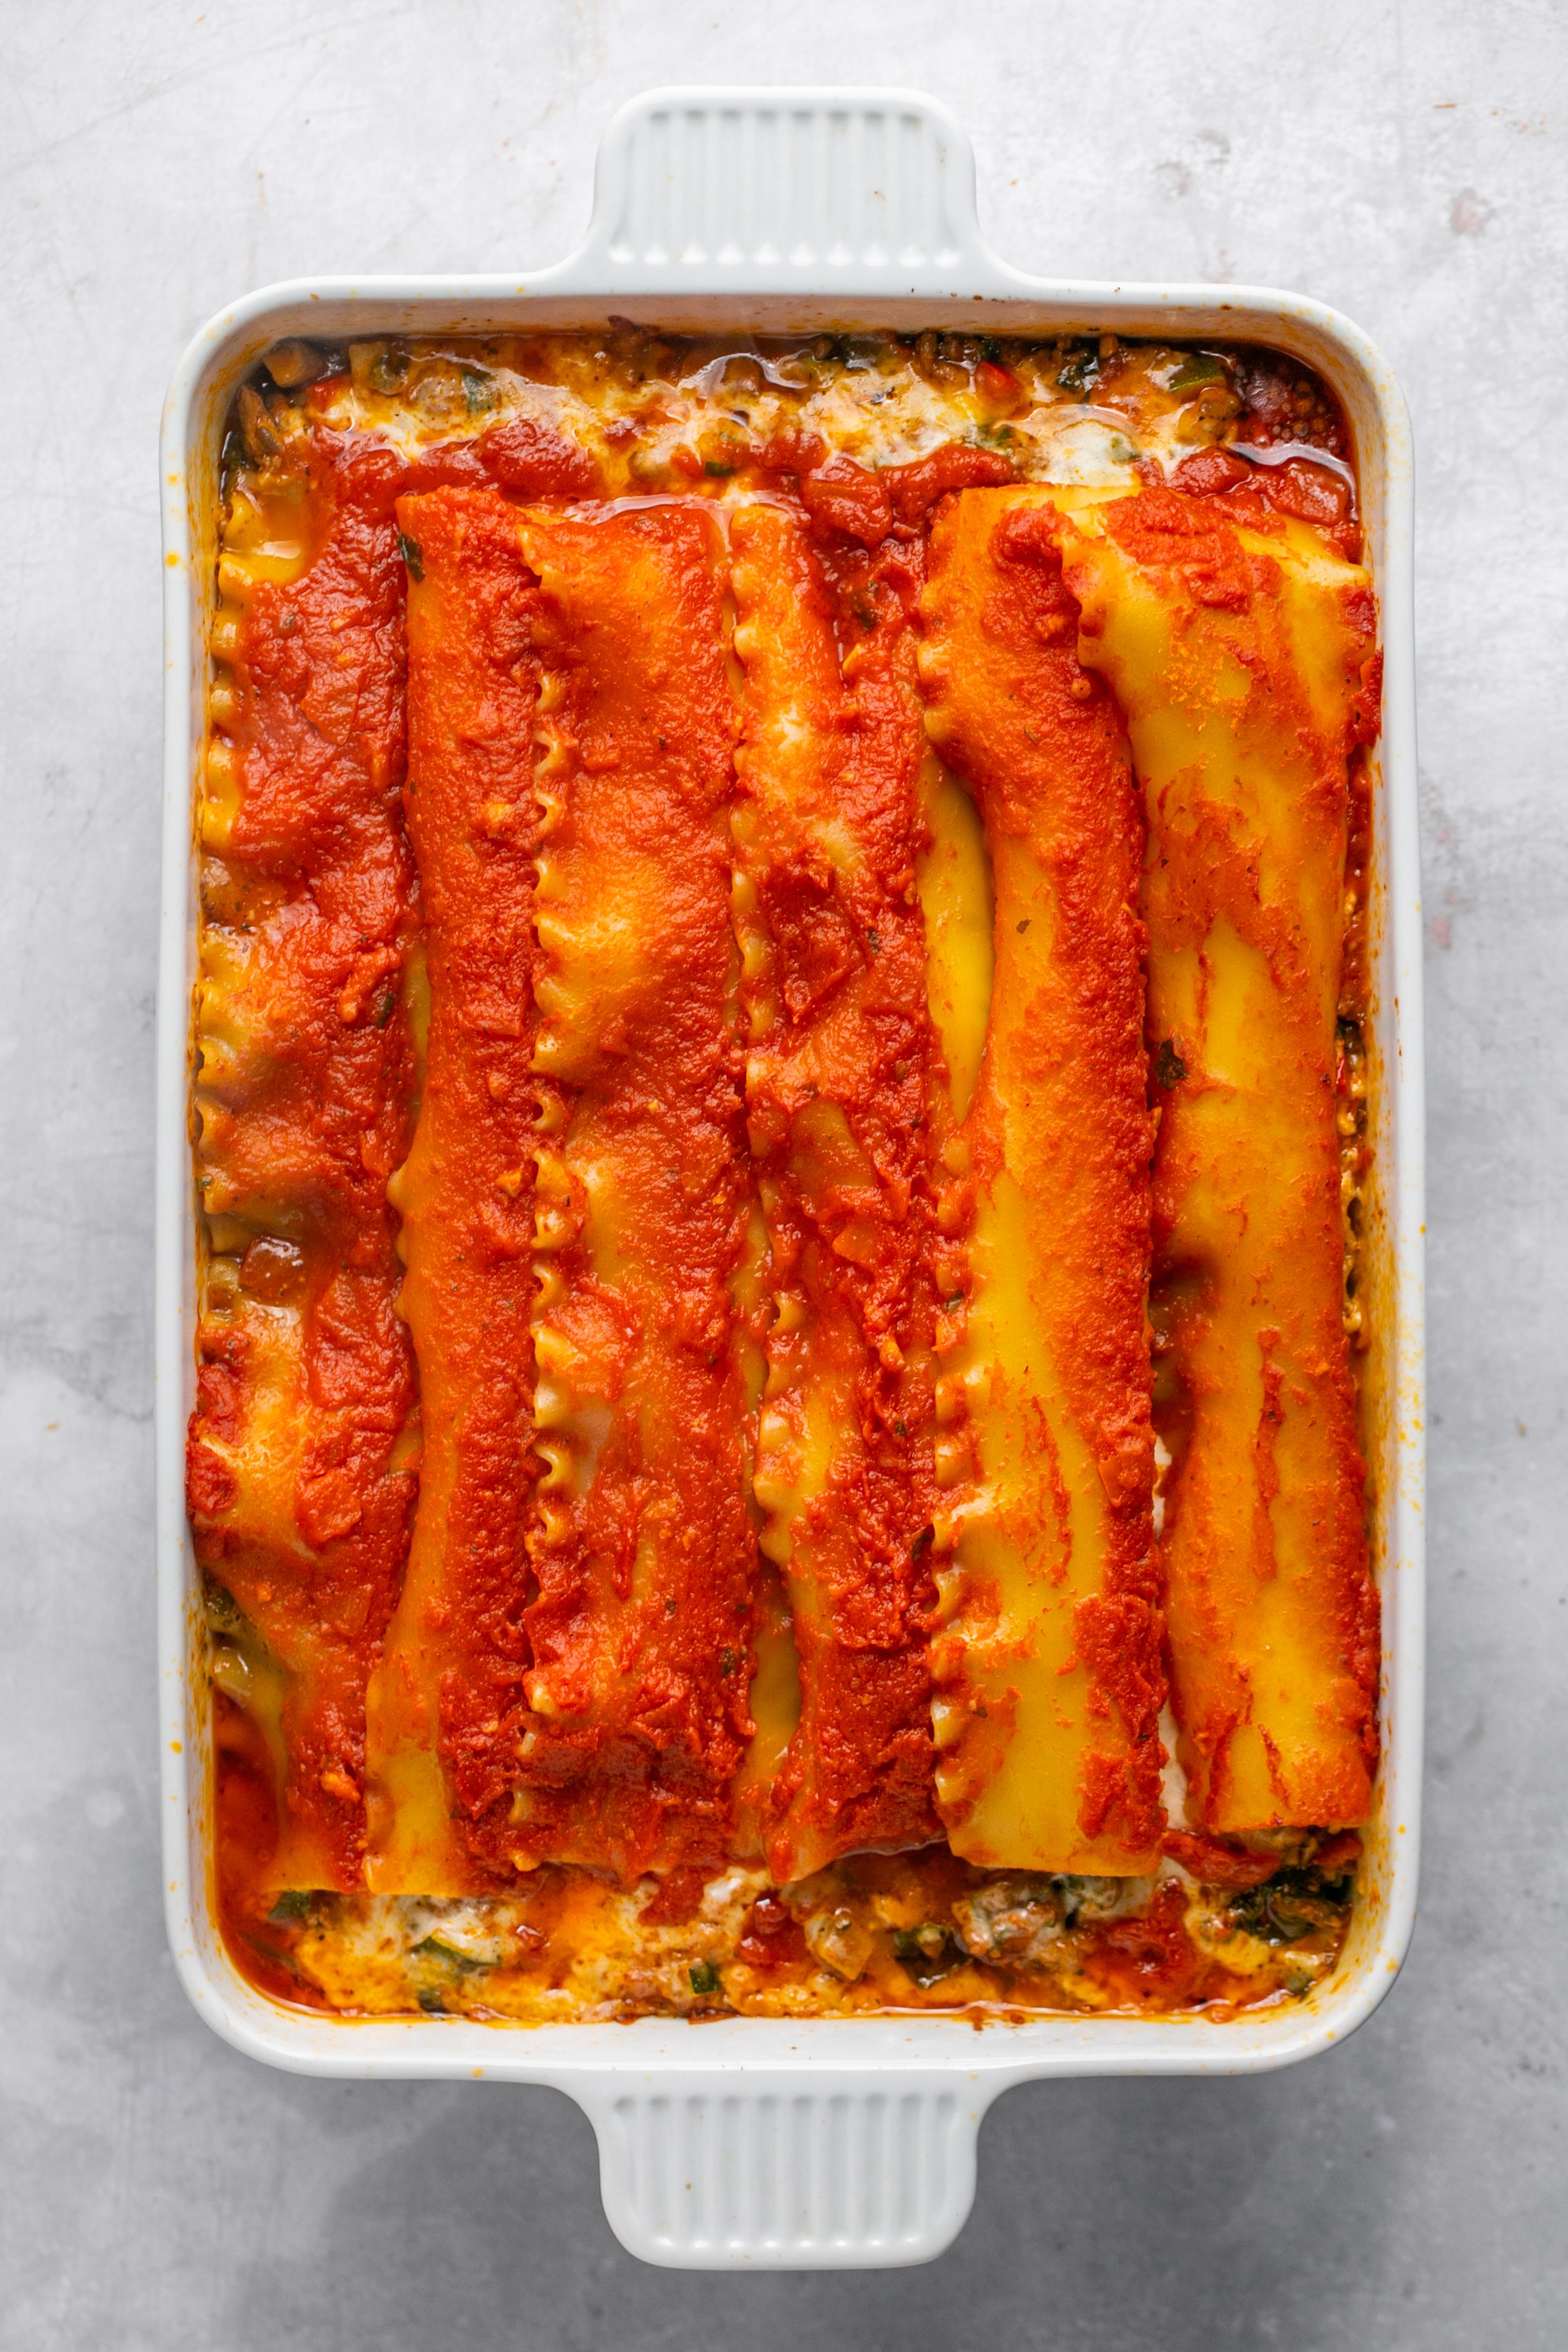 A white casserole dish flled with cooked lasagna sitting on a grey surface. Top layer of the lasagna is noodles and marinara sauce.